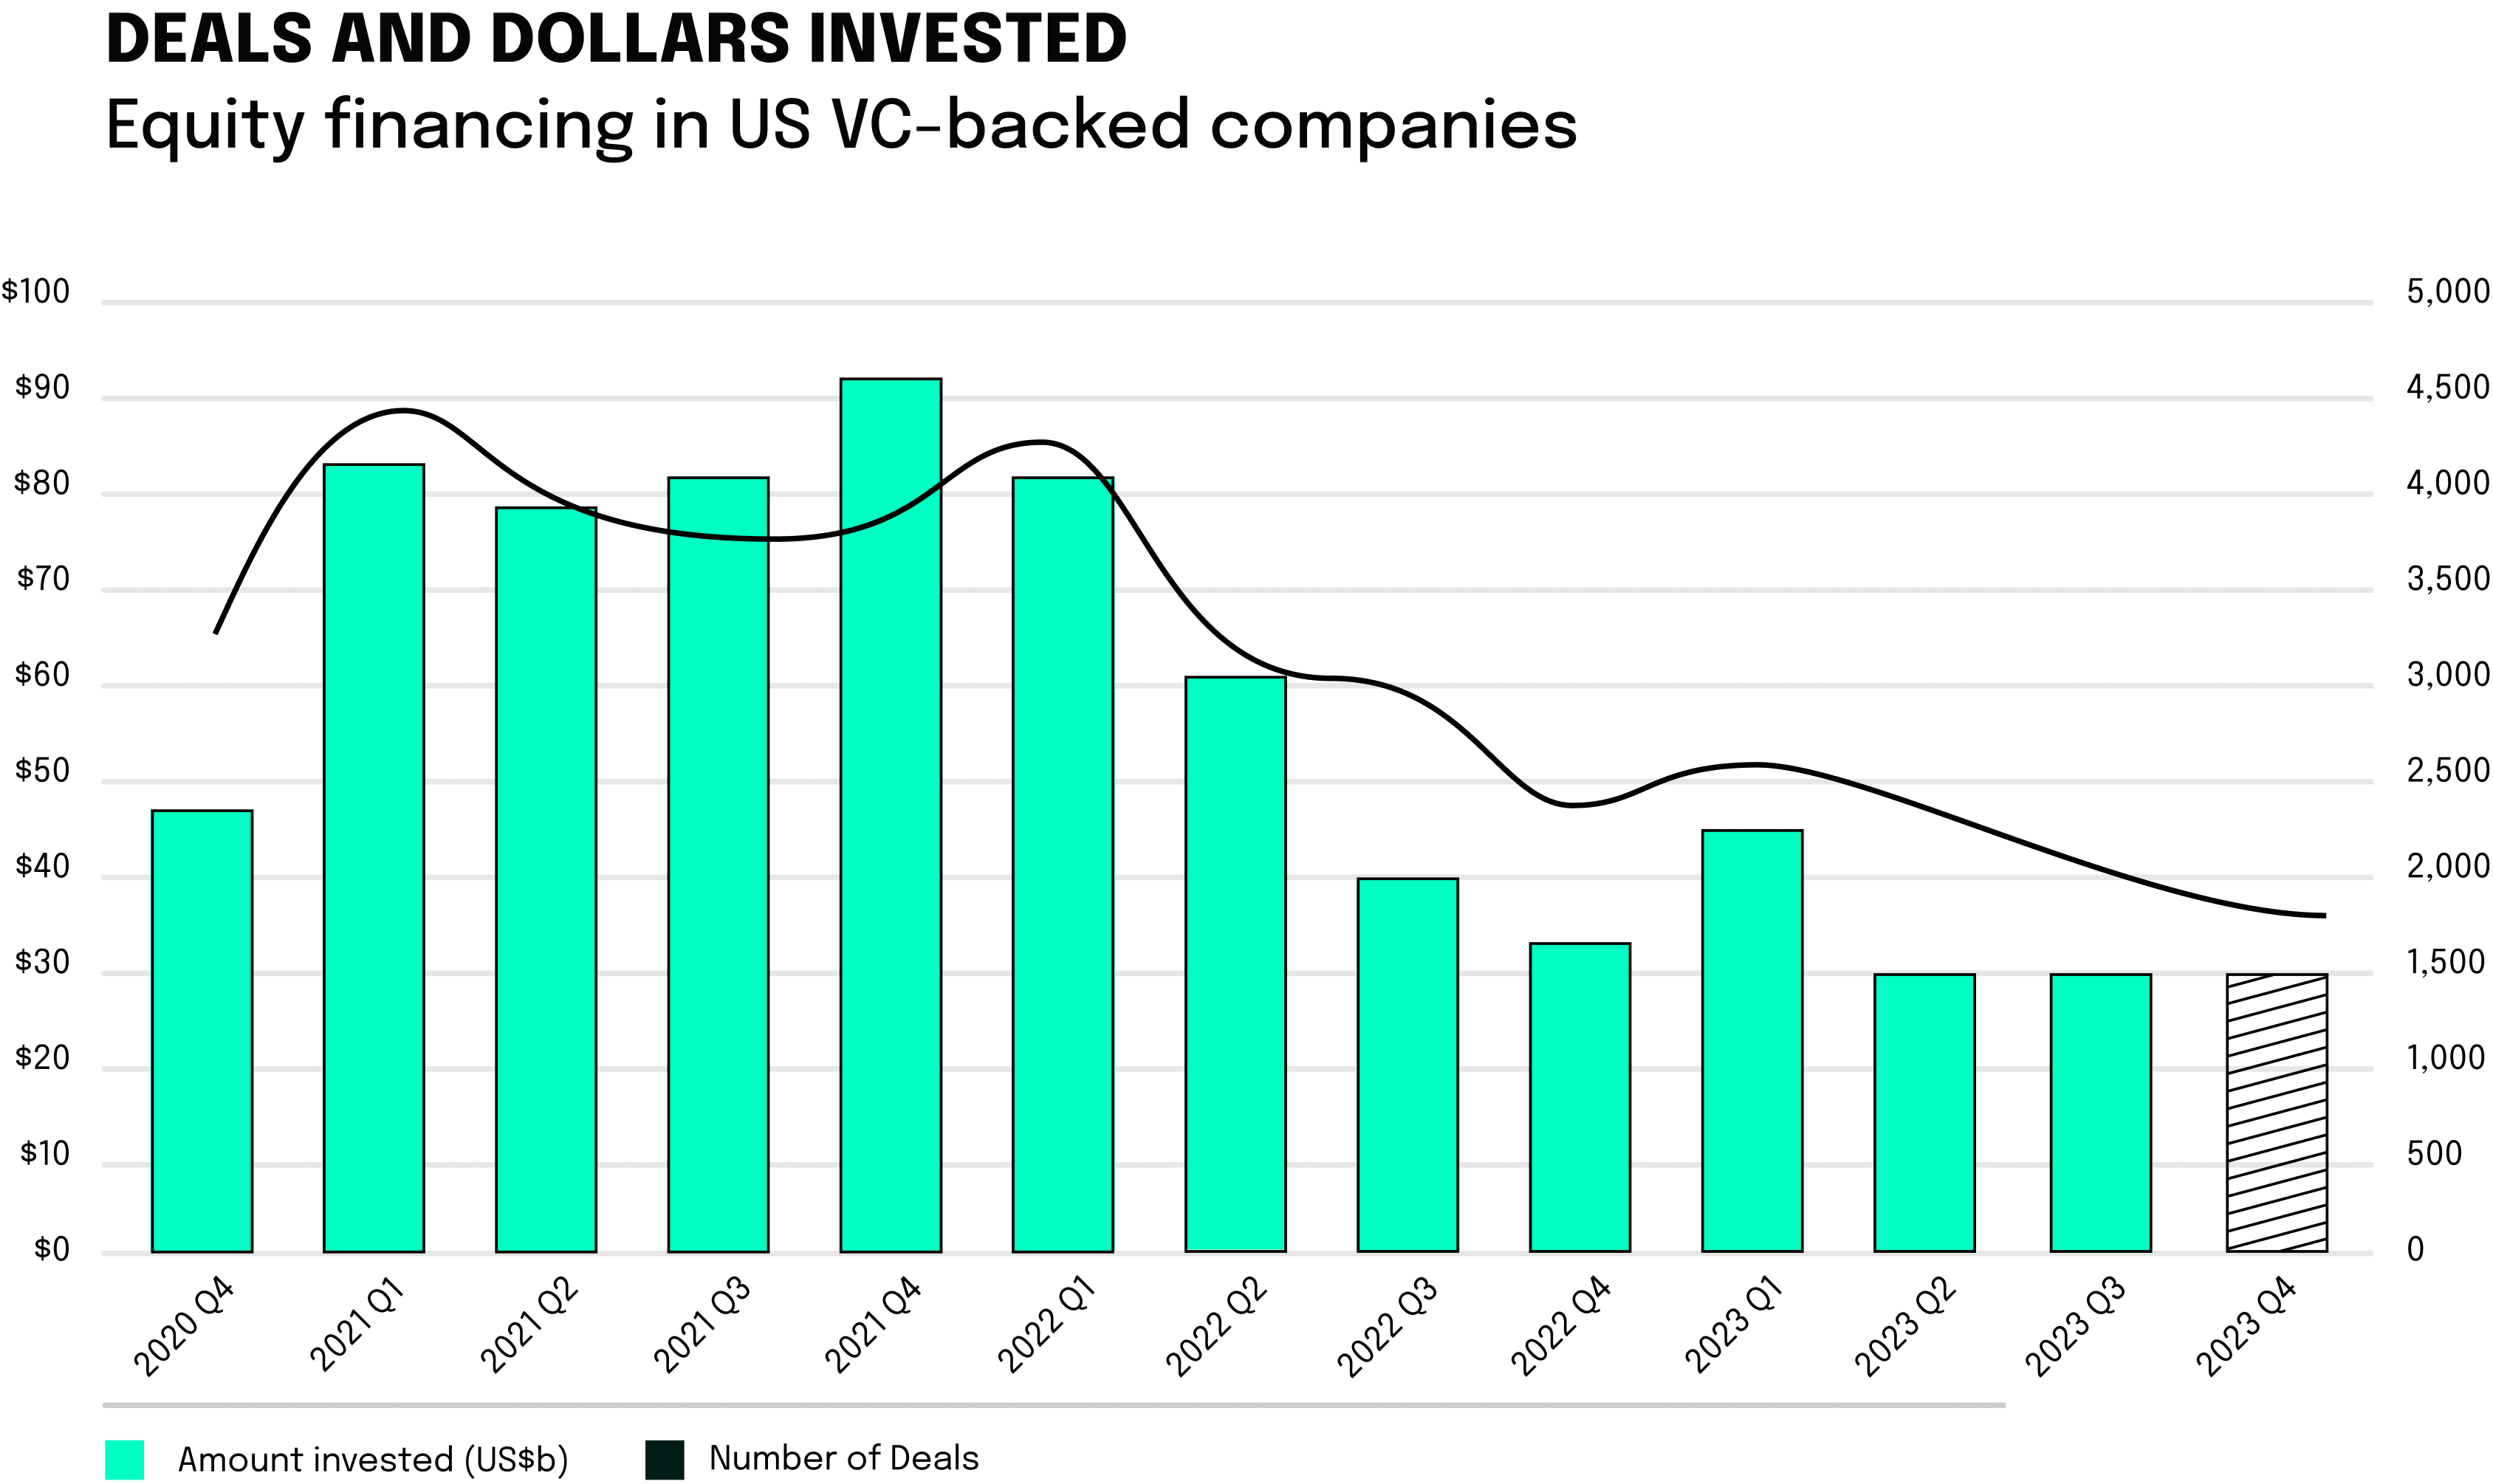 This bar and line chart illustrates the development of equity financing for VC-financed companies in the US from Q1 2018 to Q1 2023. After peaking in the second quarter of 2021, a general downward trend can be observed in both the number of deals and investment amounts. The number of deals fell from over 3,800 in the second quarter of 2021 to under 2,500 in the first quarter of 2023, while the amount invested fell from almost USD 80 billion in the second quarter of 2021 to around USD 30 billion in the first quarter of 2023, showing a significant decline in venture capital activity over the period shown.